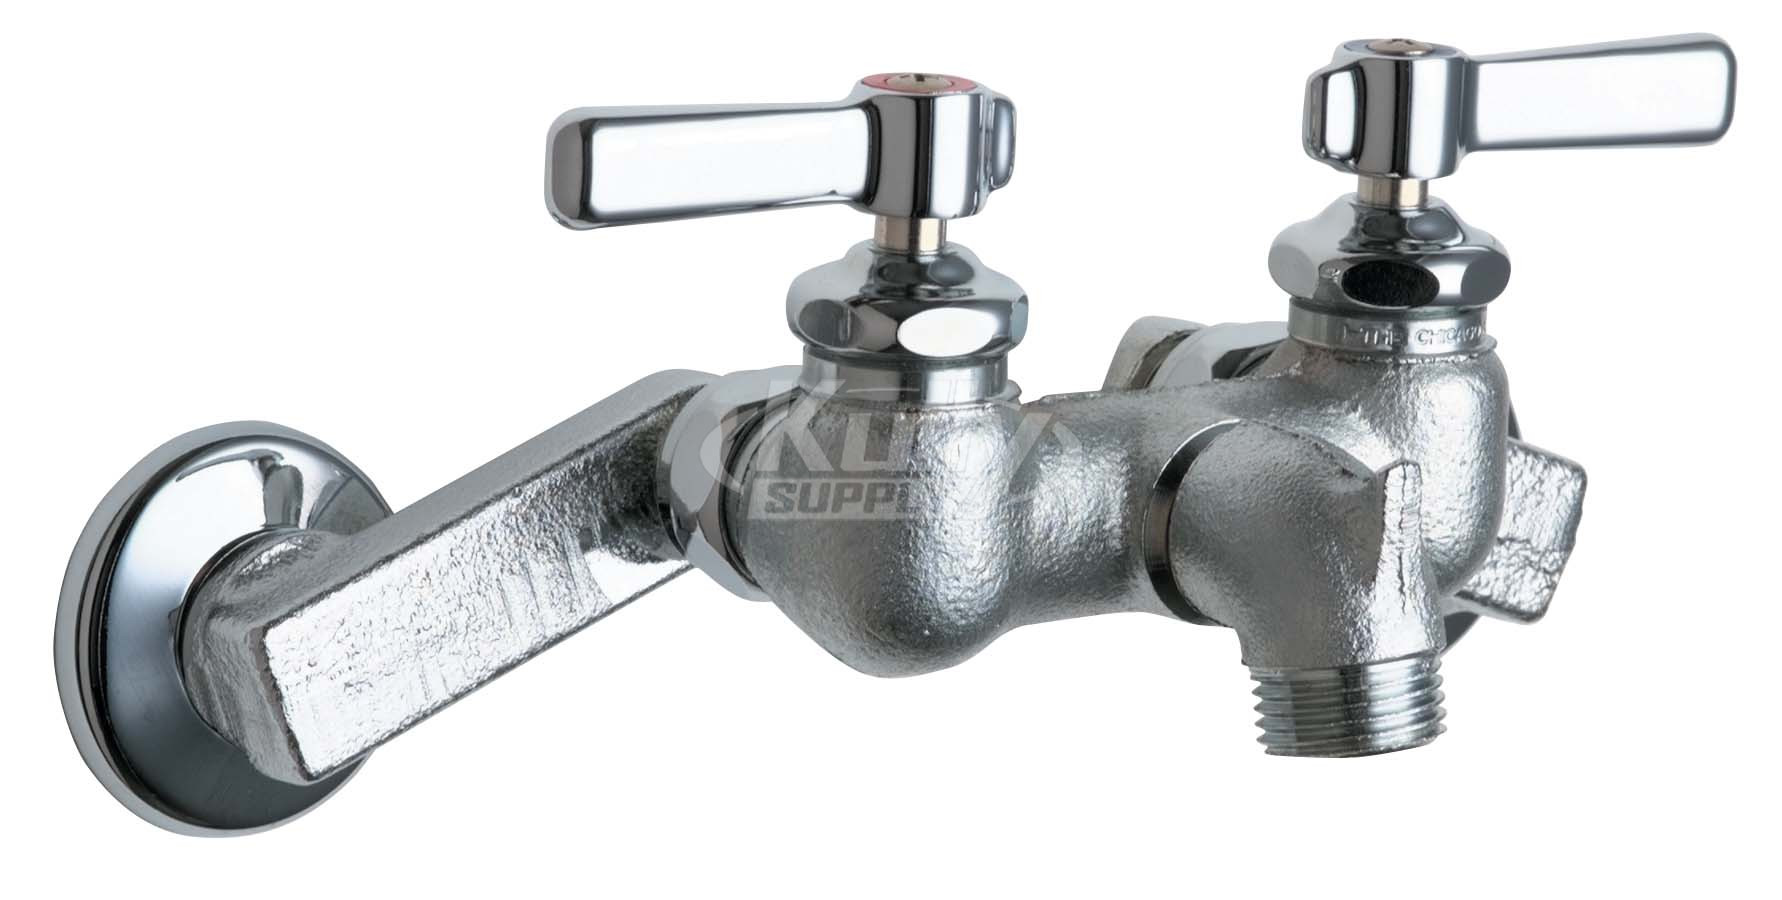 Chicago 305-RCF Service Sink Faucet